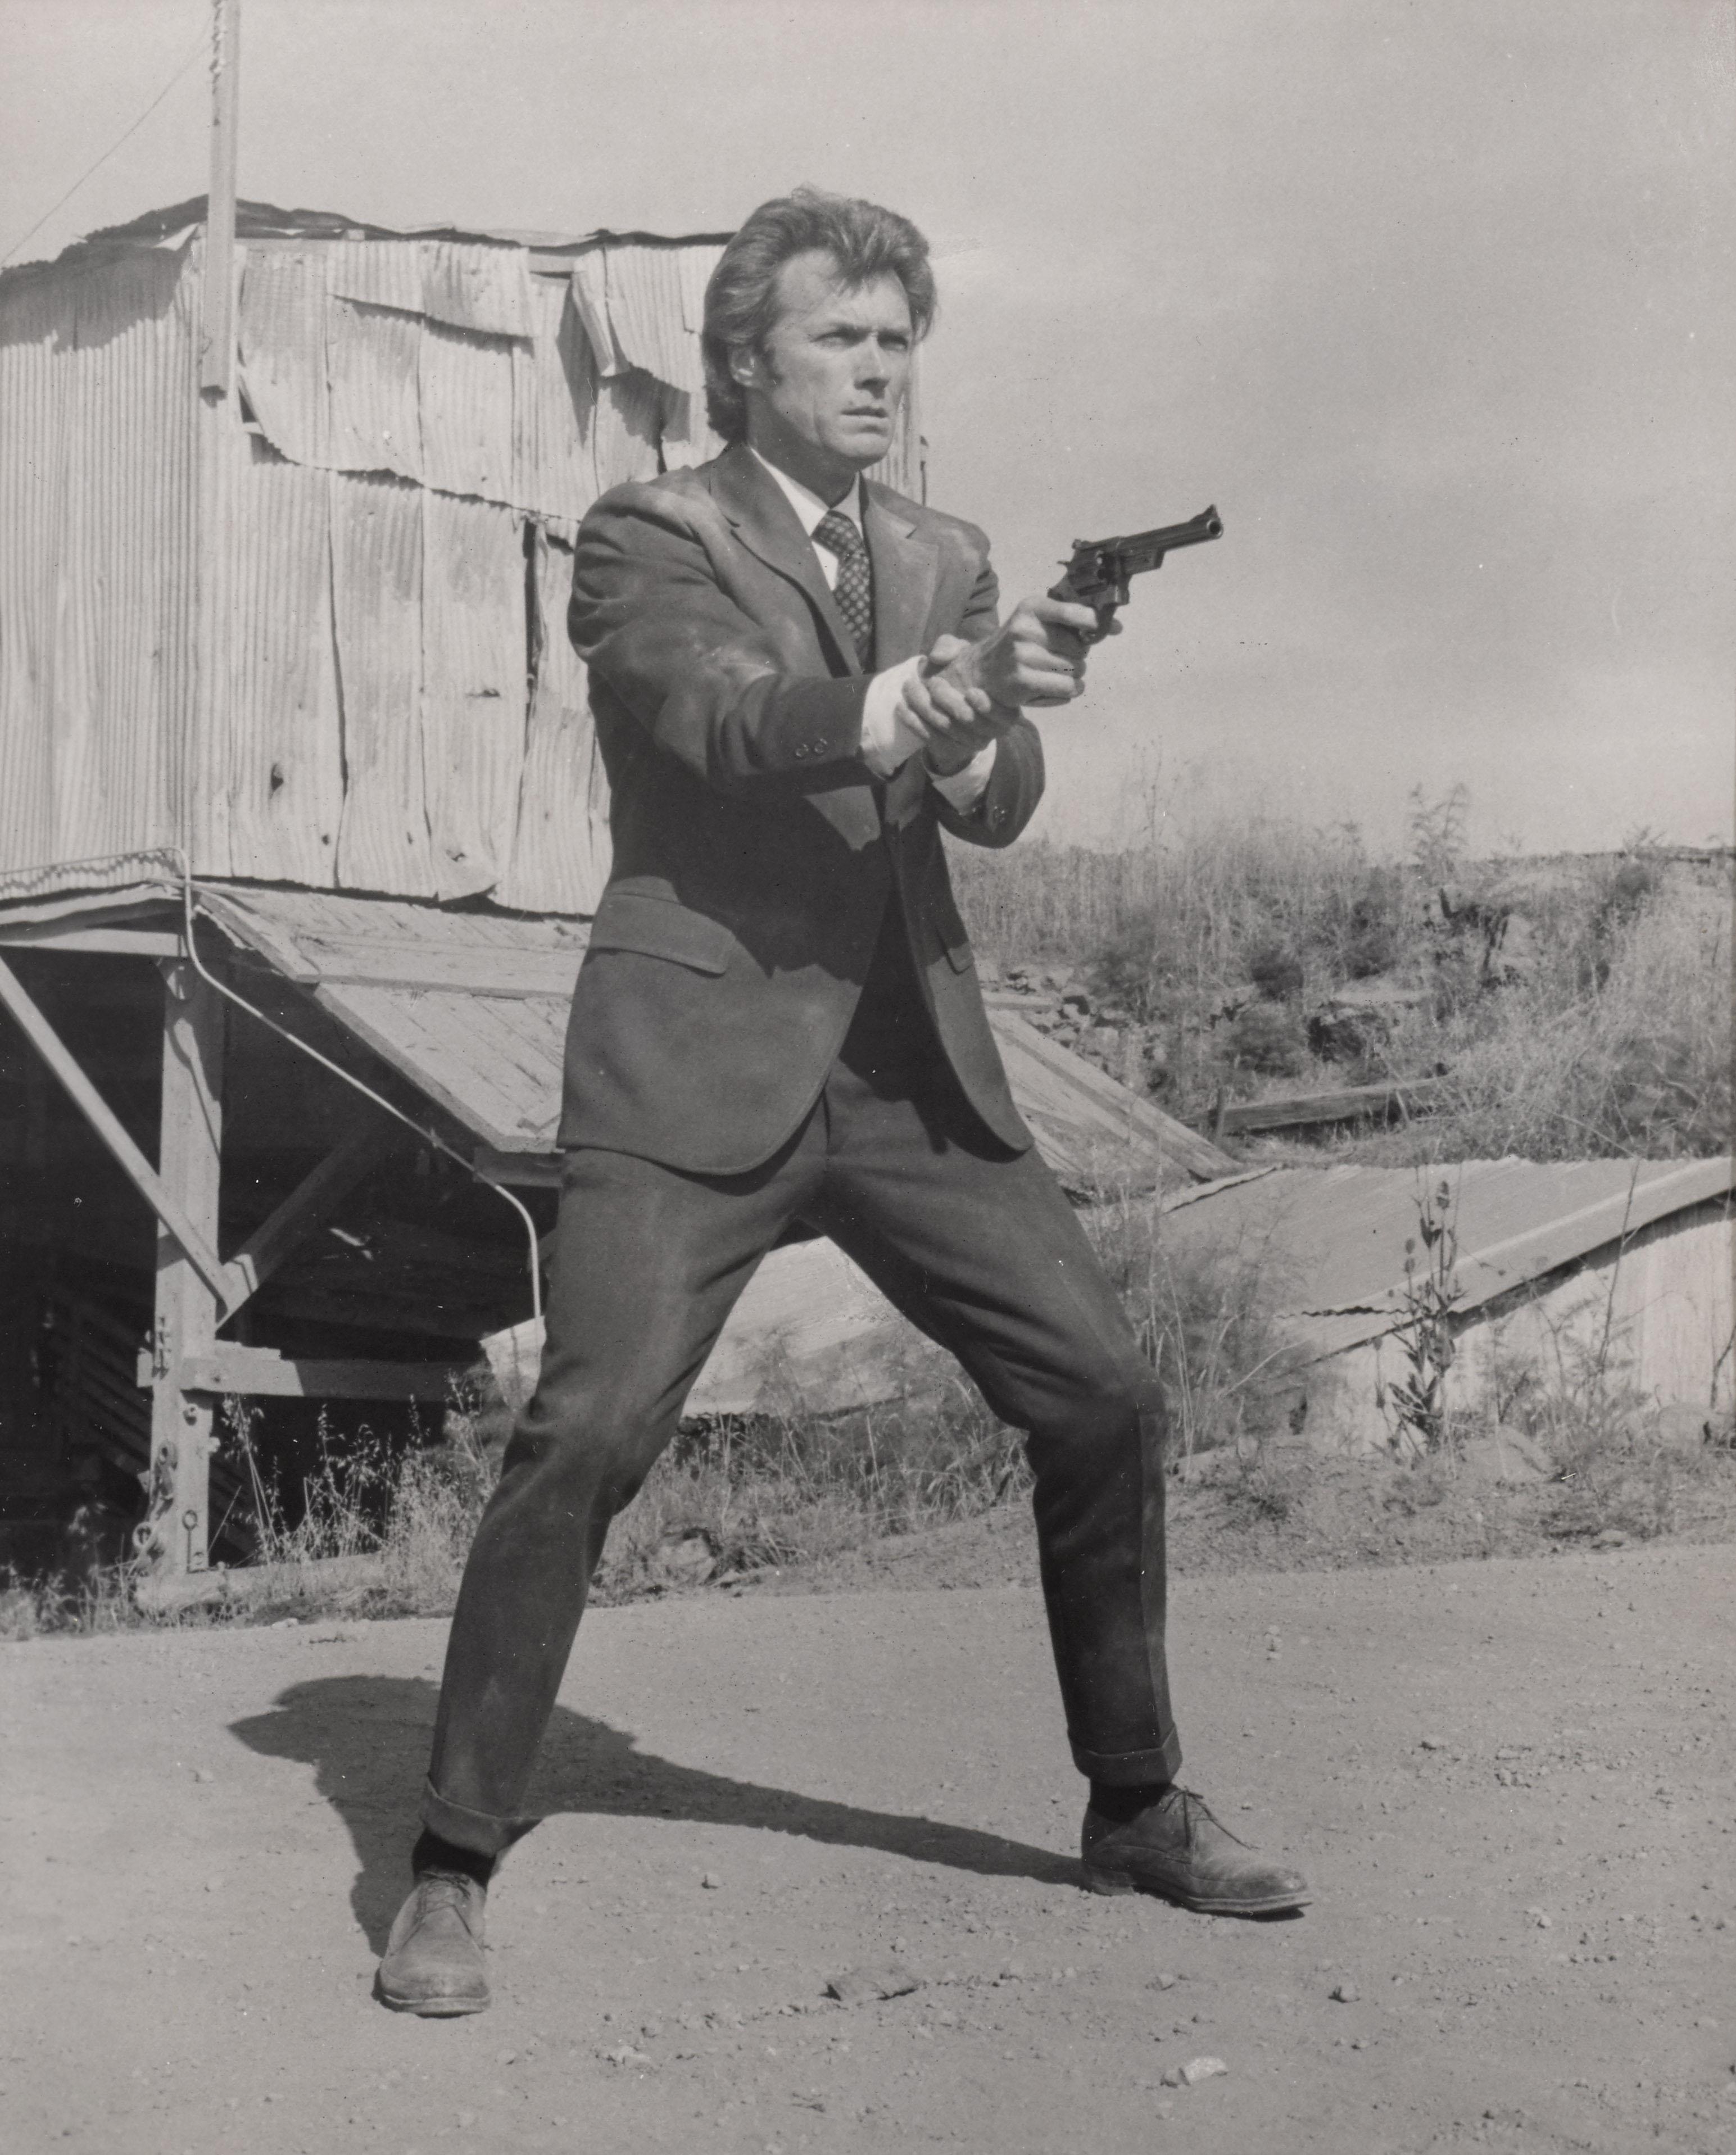 Original photographic production still for Clint Eastwood's classic Dirty Harry.
This film was directed by Don Siegel. 
This piece is framed in a Sapele wood frame with acid free card mounts and UV Plexiglass.
The size given is before